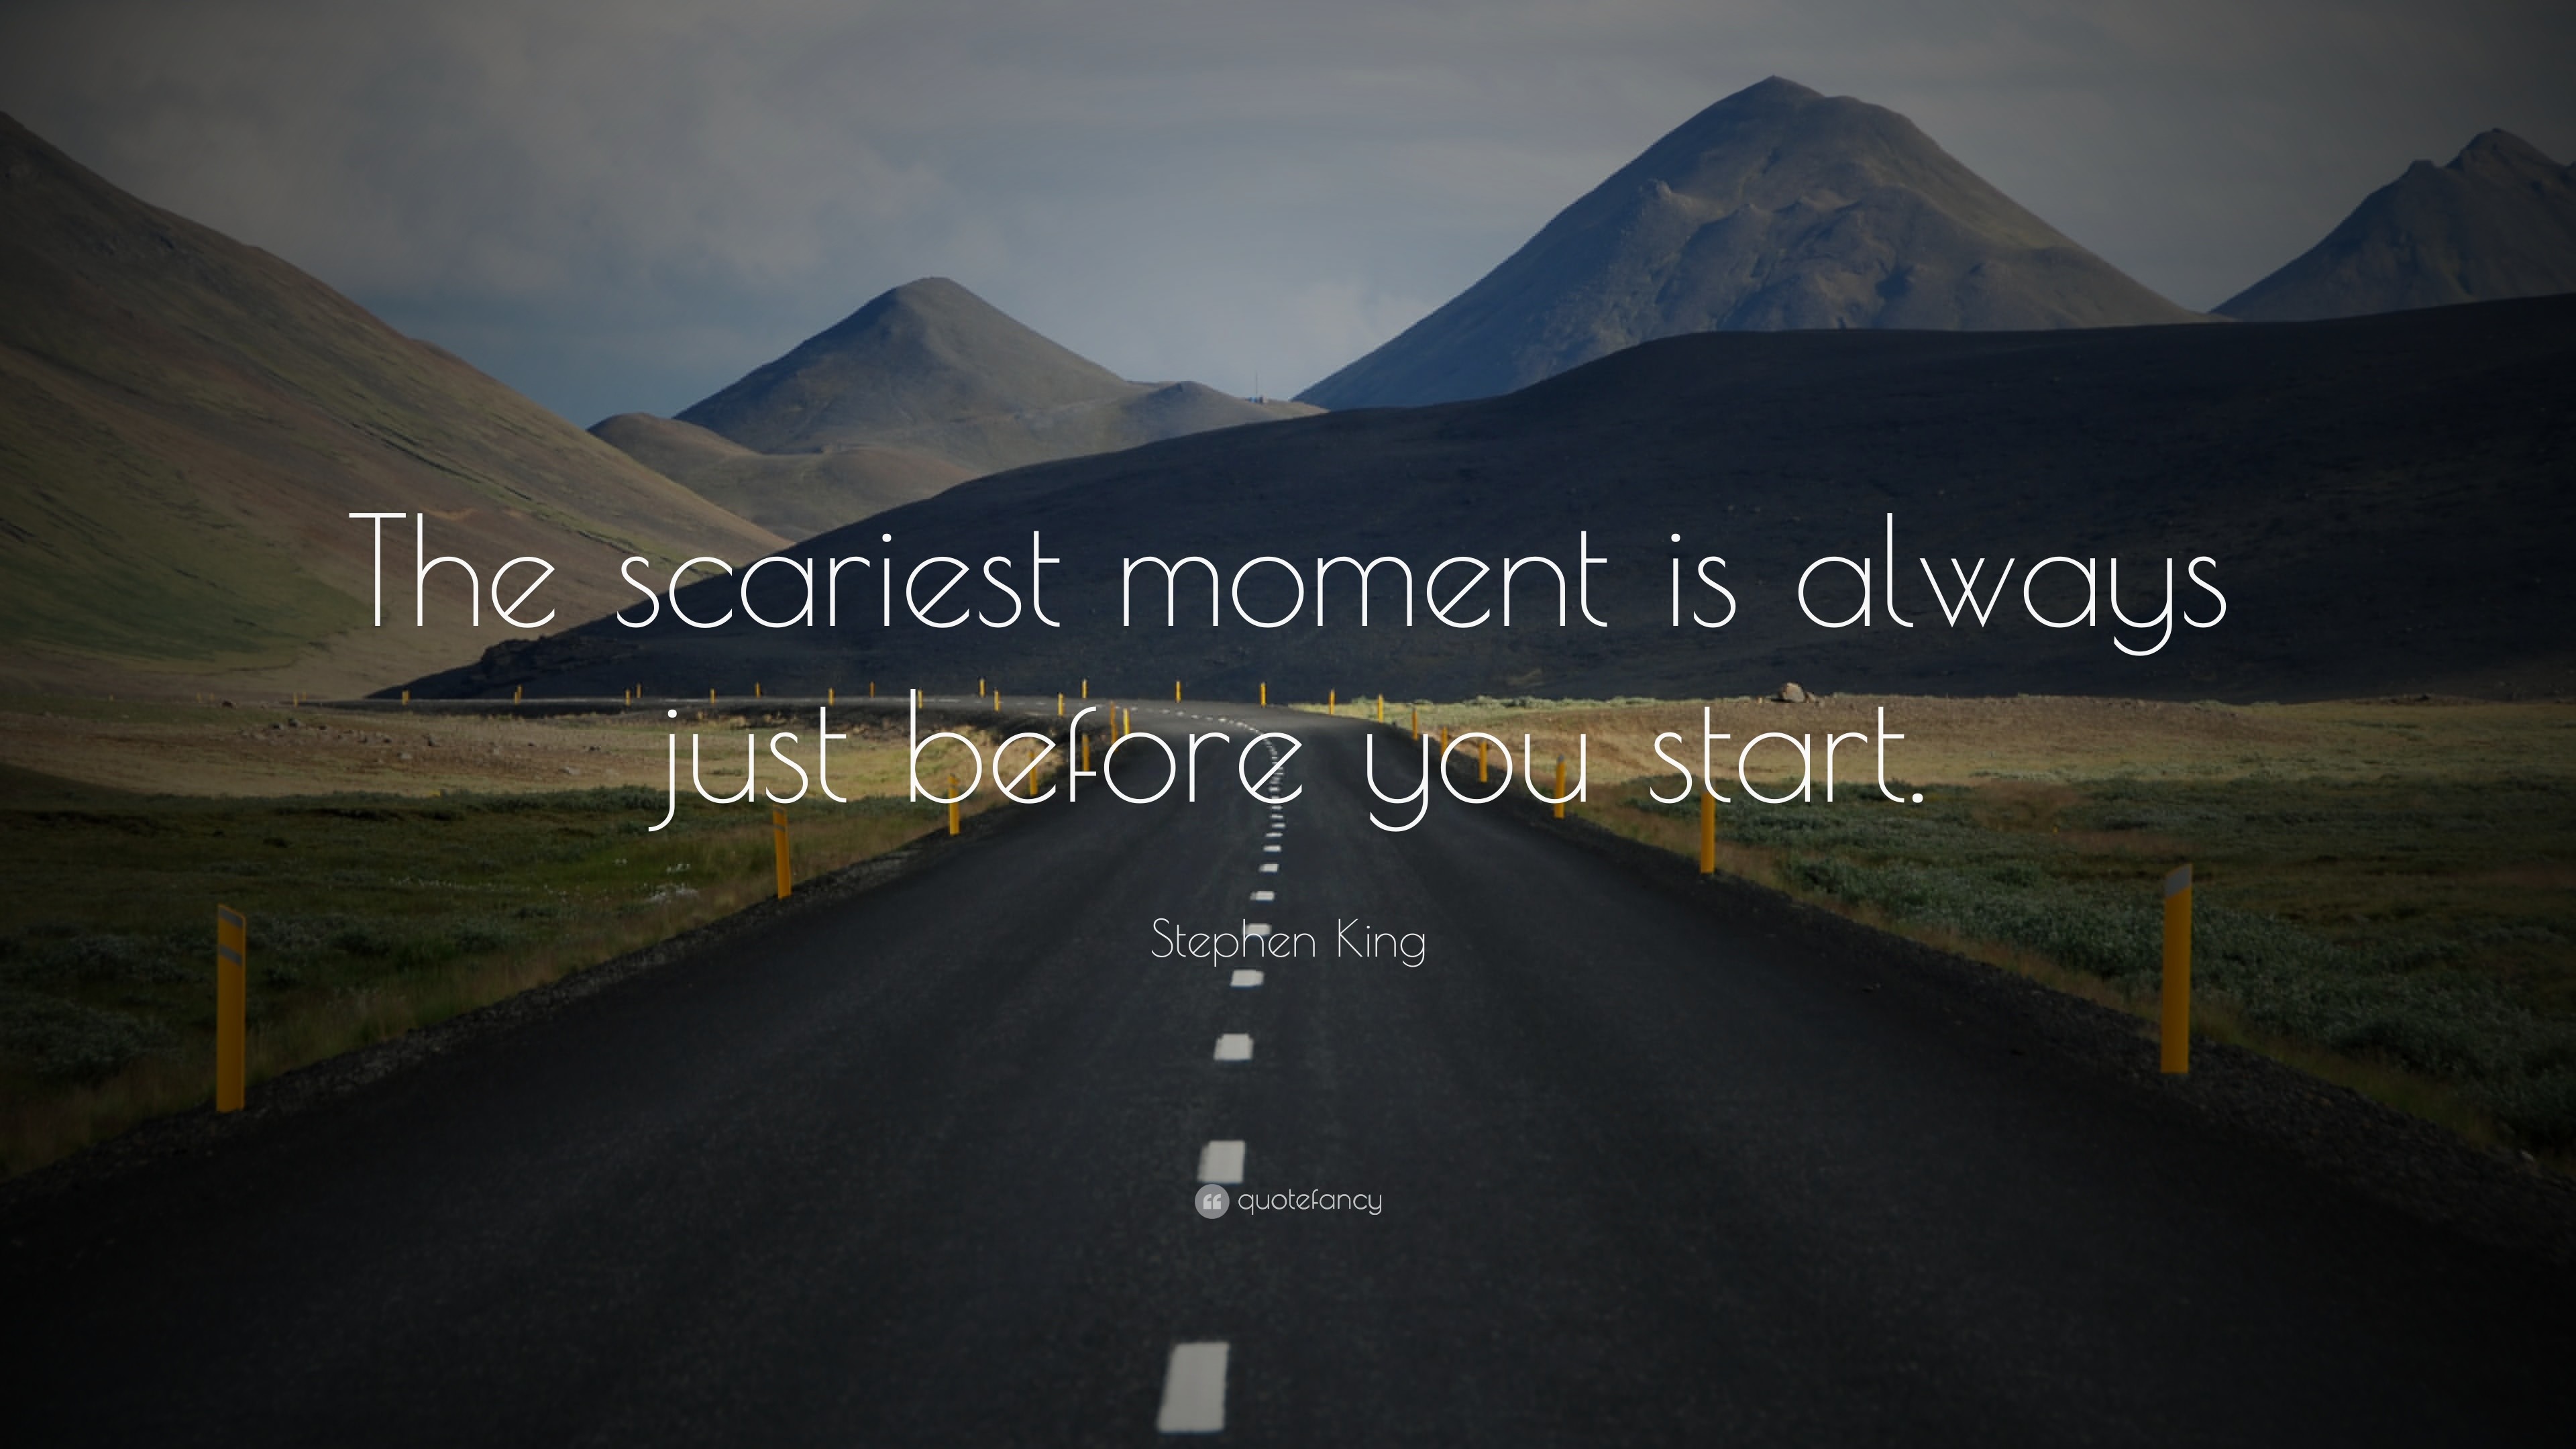 3840x2160 Stephen King Quote: “The scariest moment is always just before you start.”